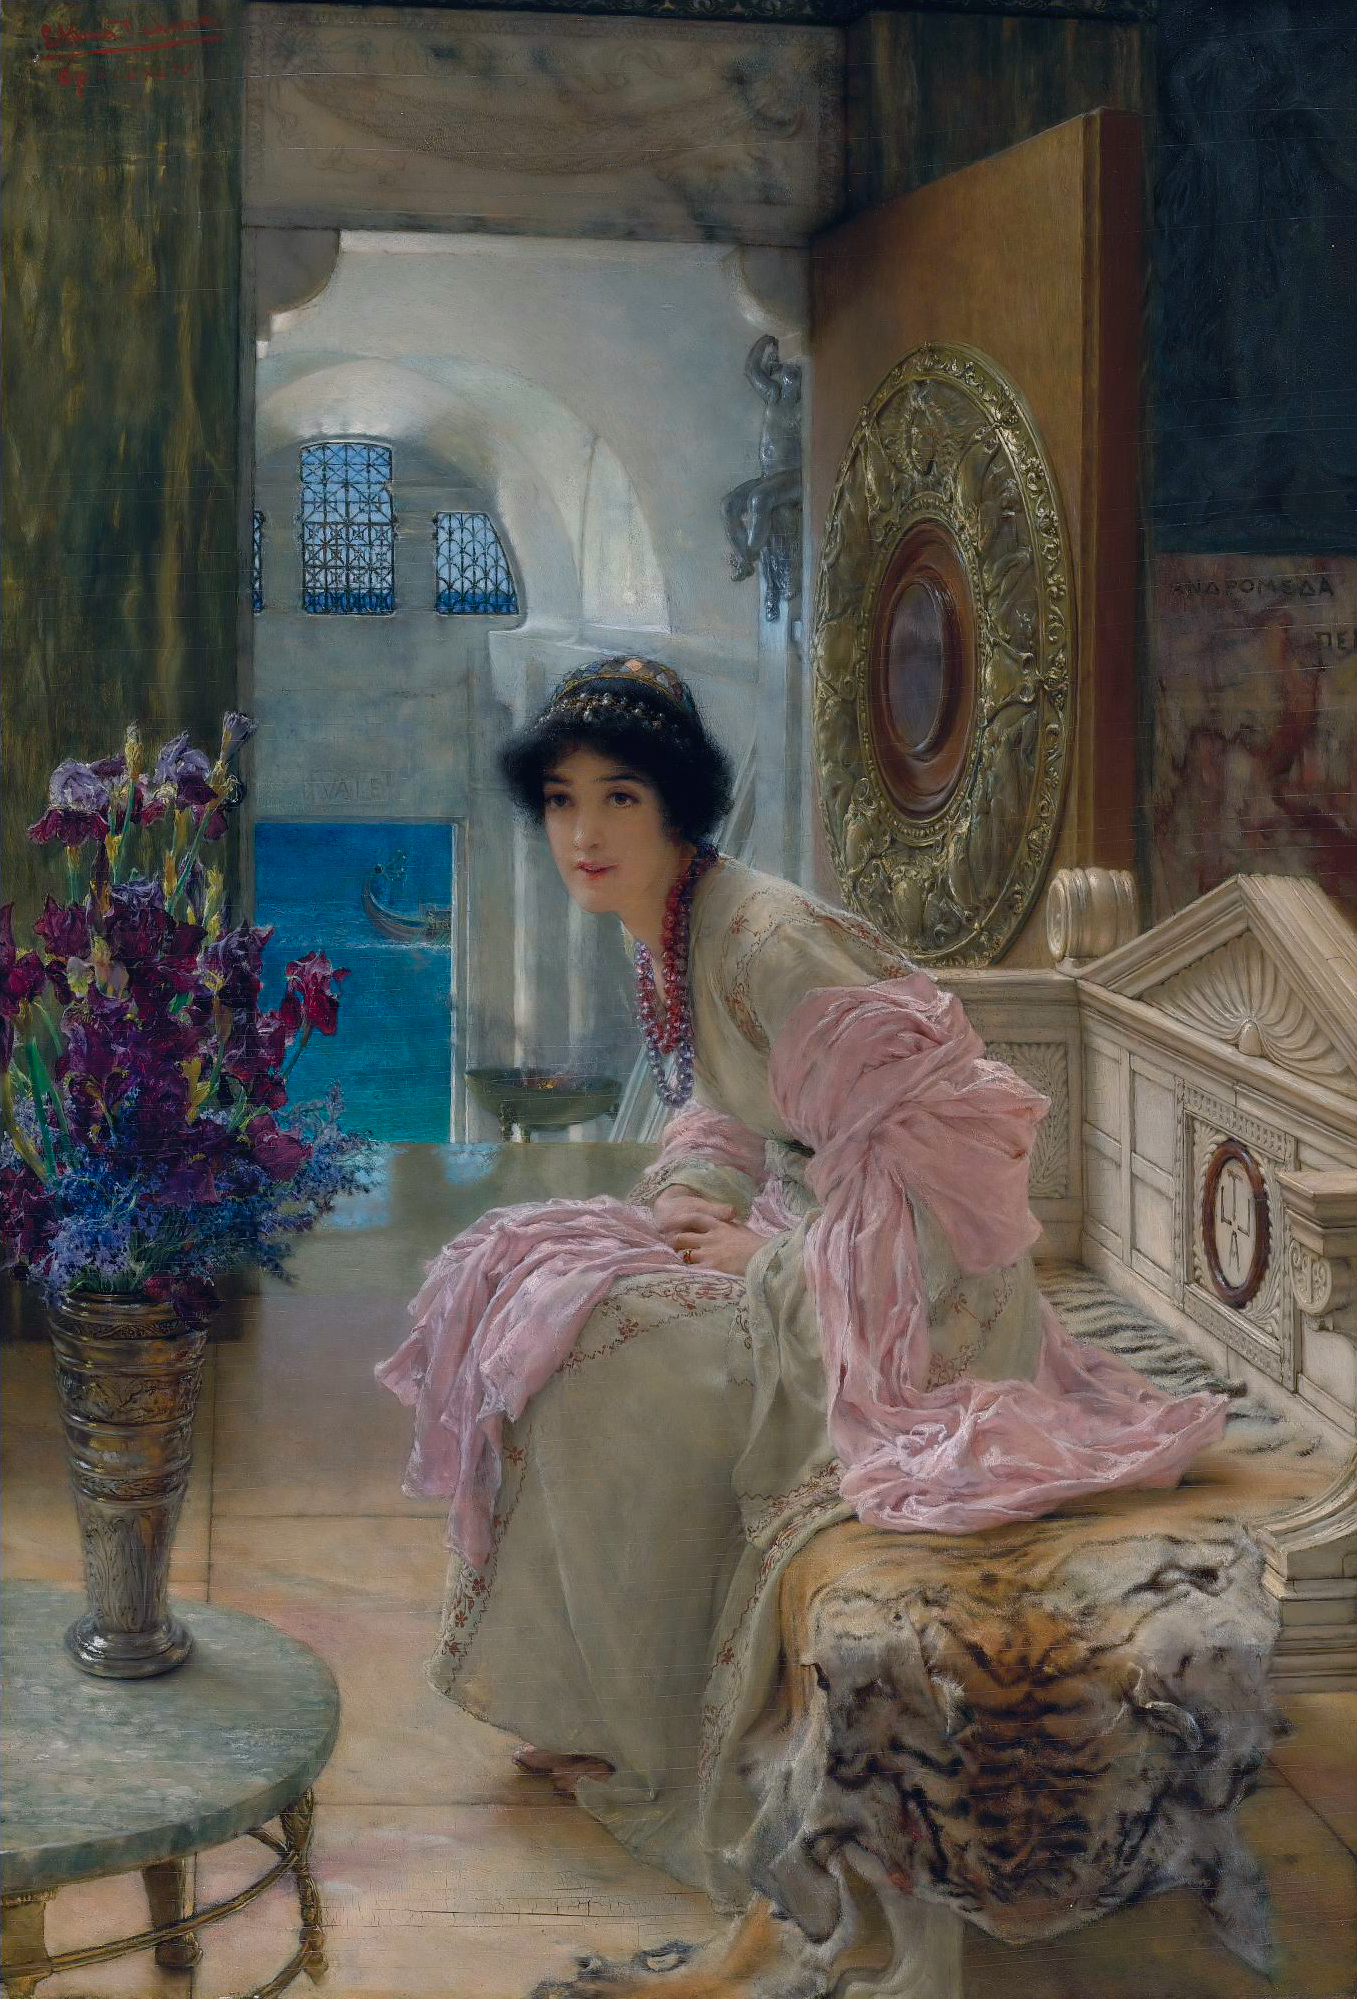 Watching and waiting, by Lawrence Alma Tadema